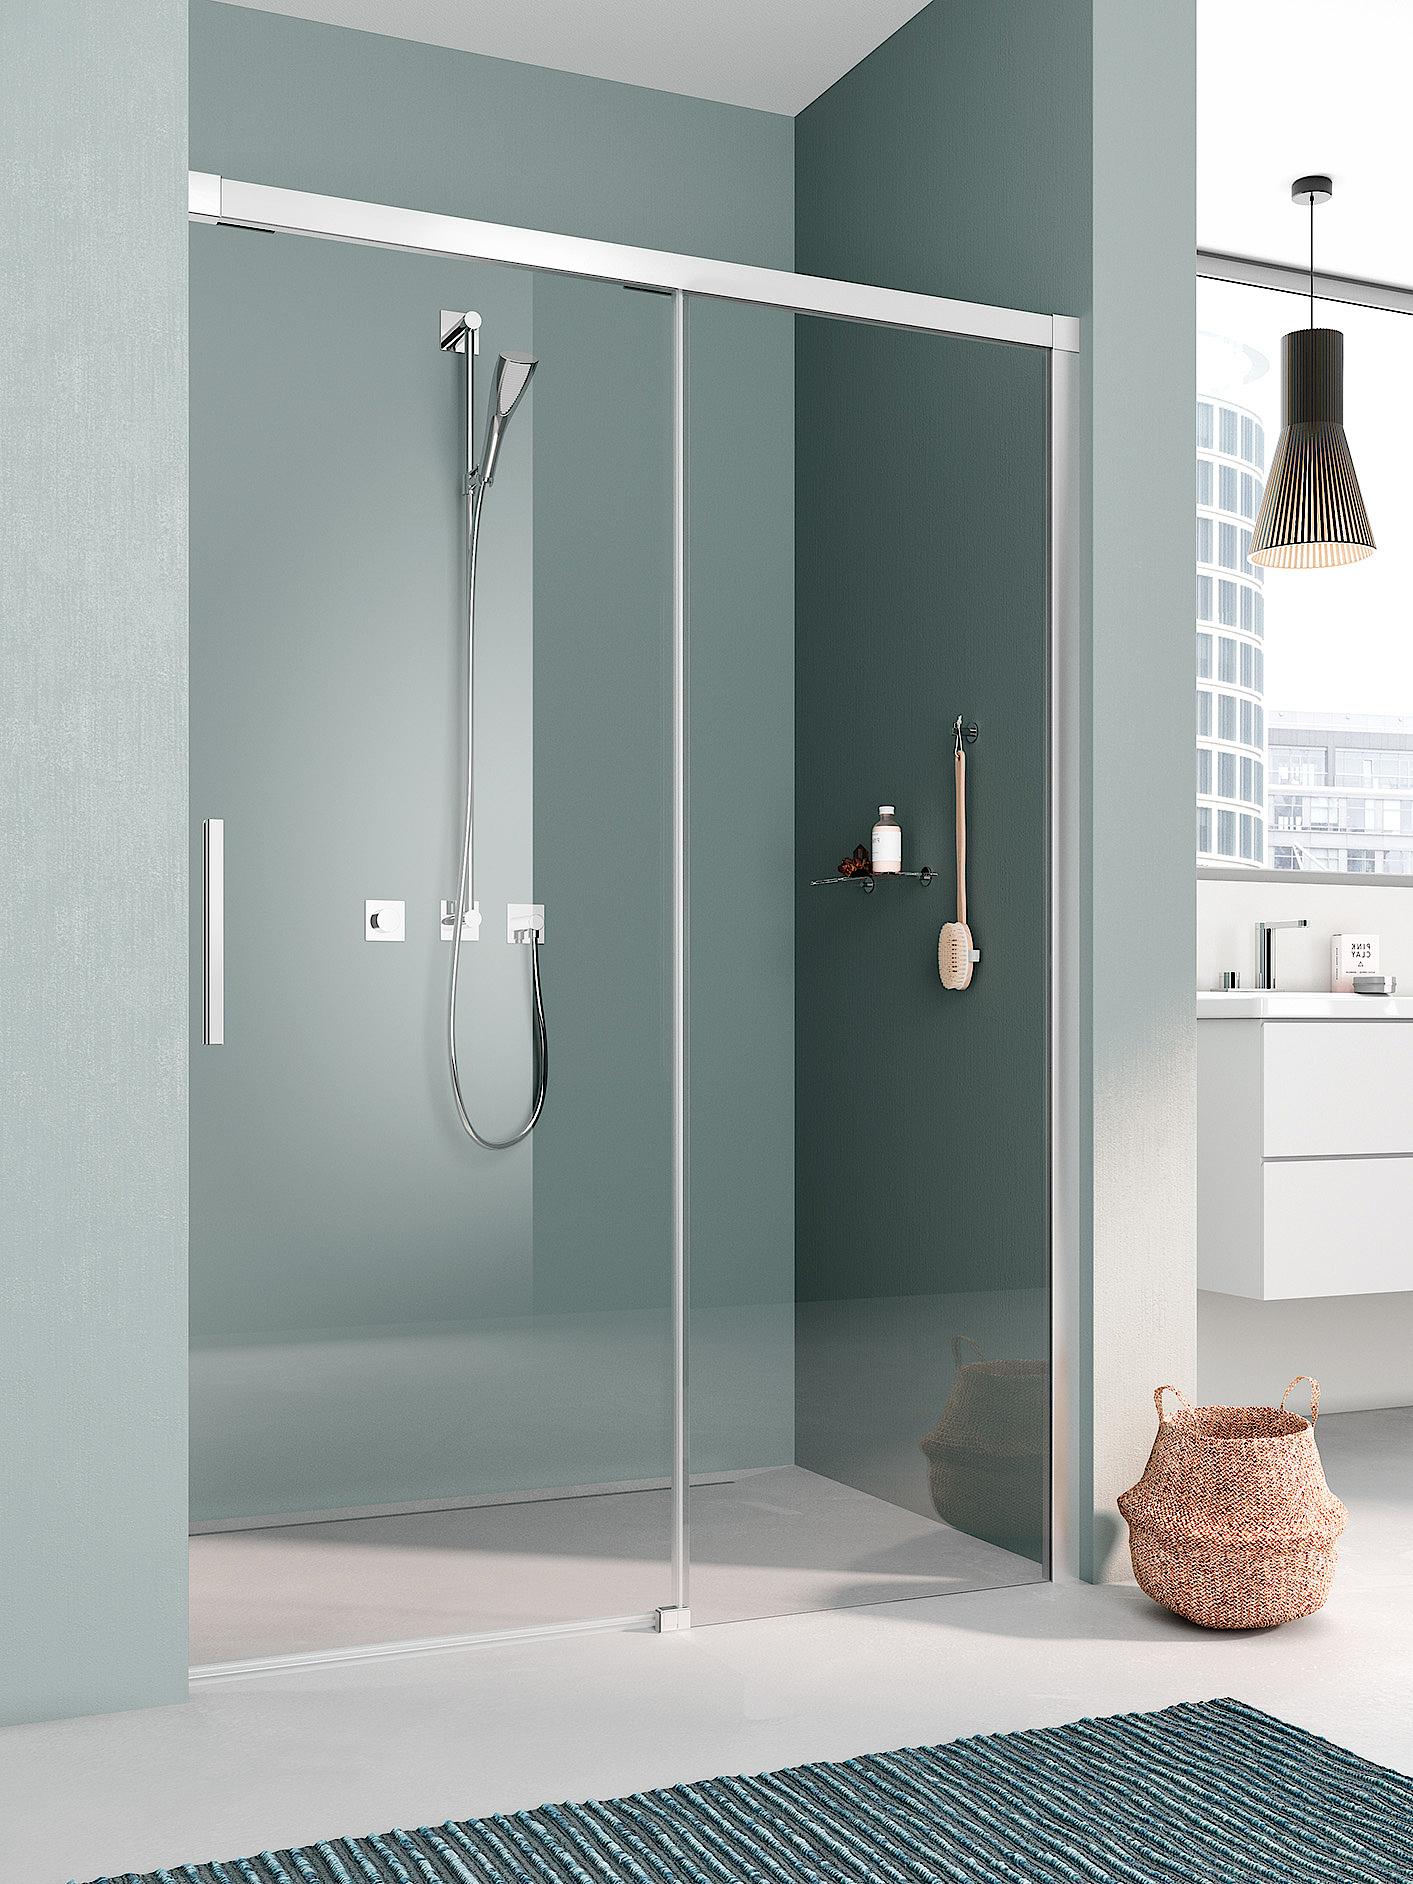 Kermi profile shower enclosure, NICA off-floor two-part sliding door with fixed panel with wall profile